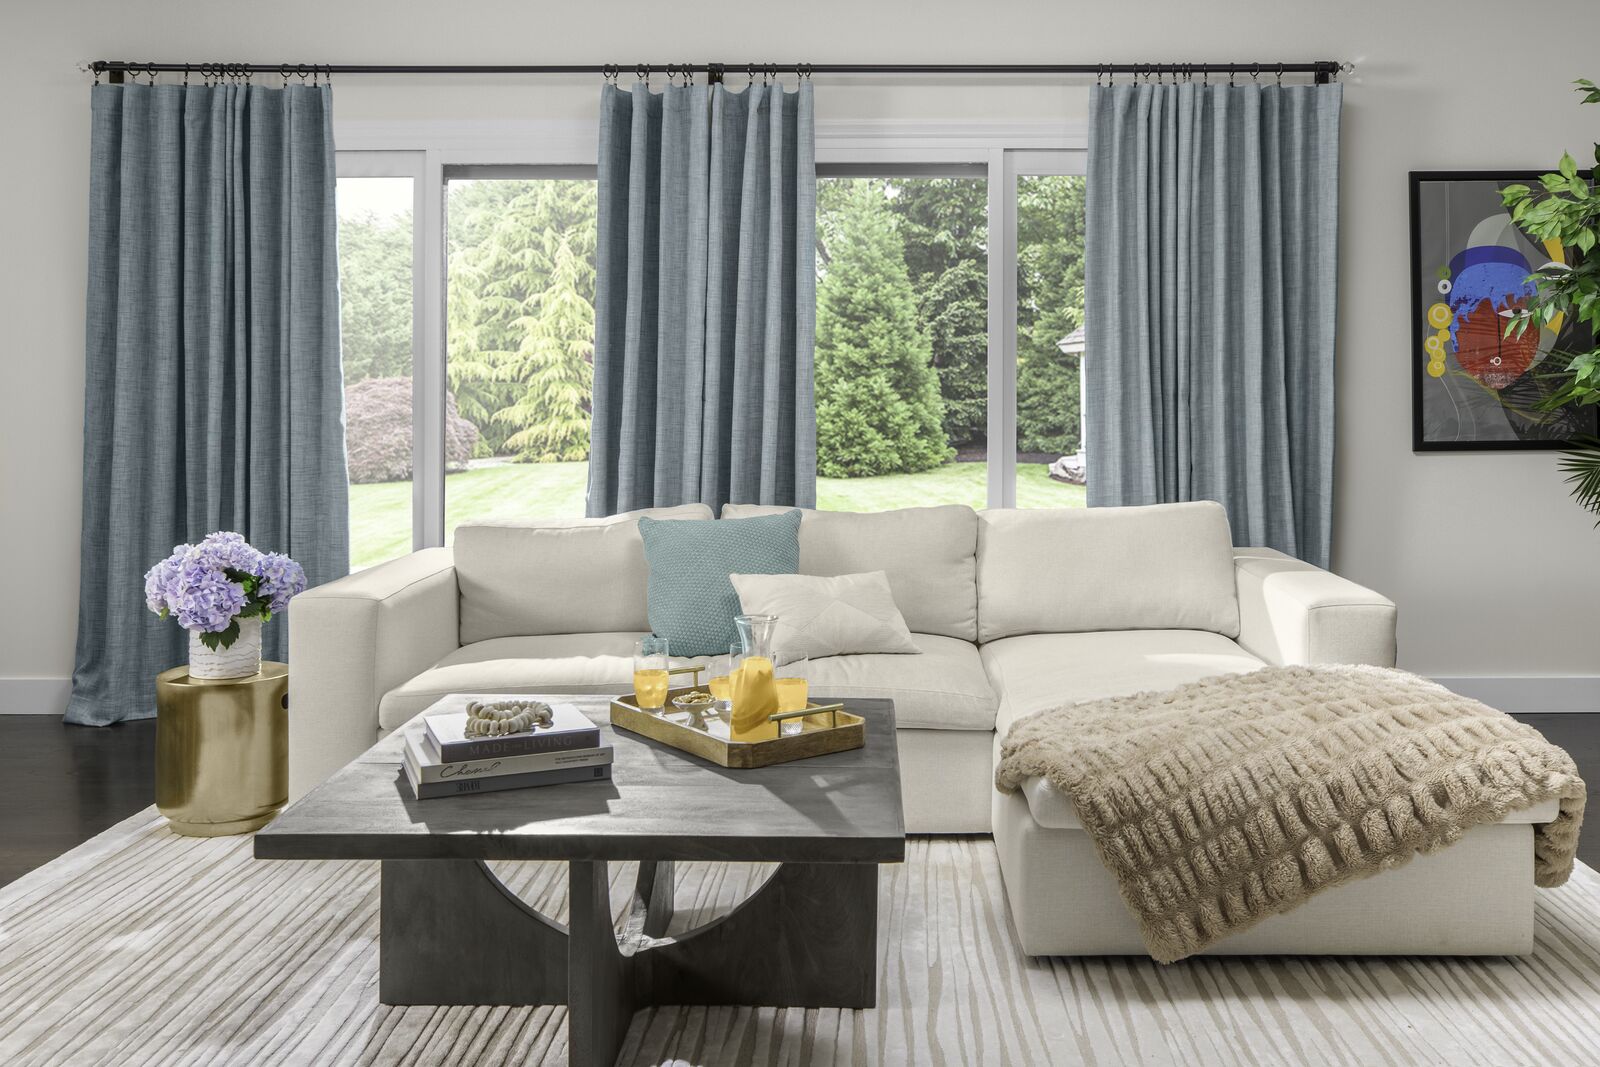 Teal curtains cover a window in a splendid living room.